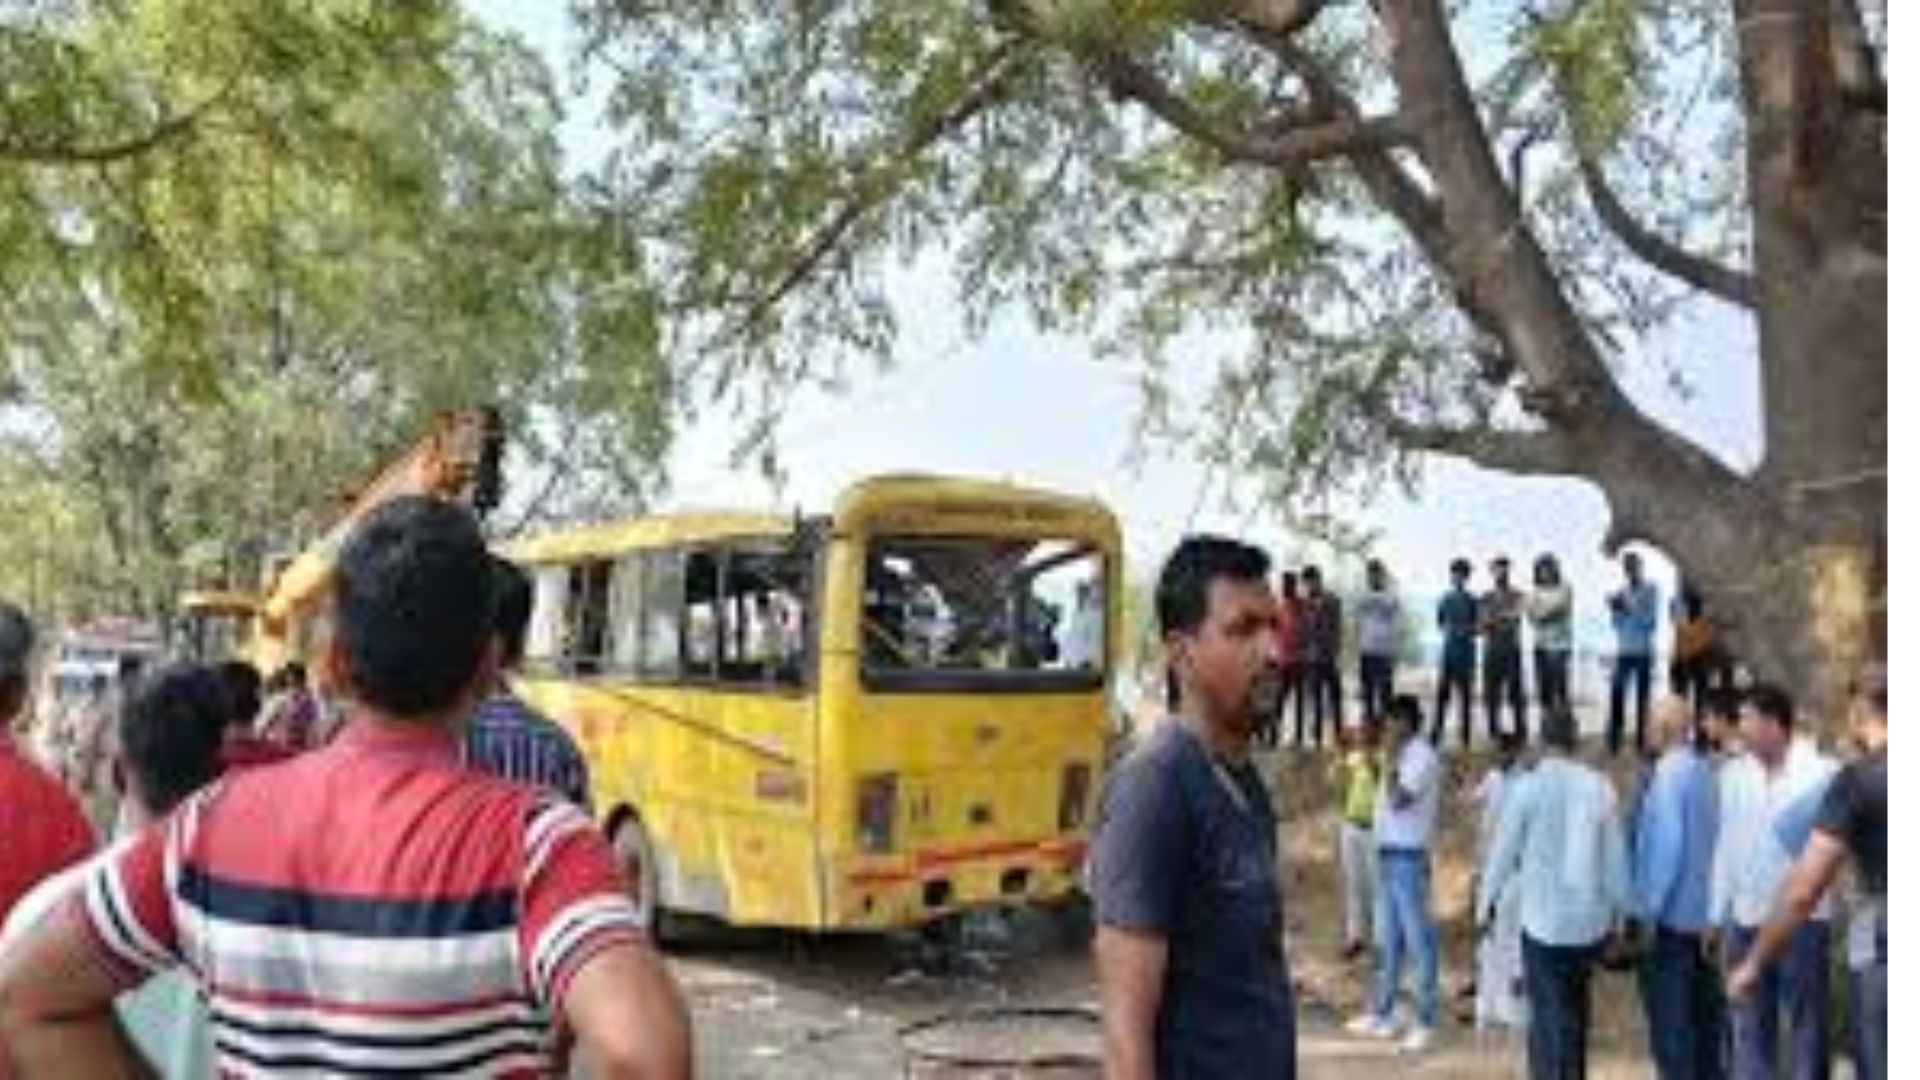 Haryana Bus Accident: 6 dead, several injured after school bus overturned